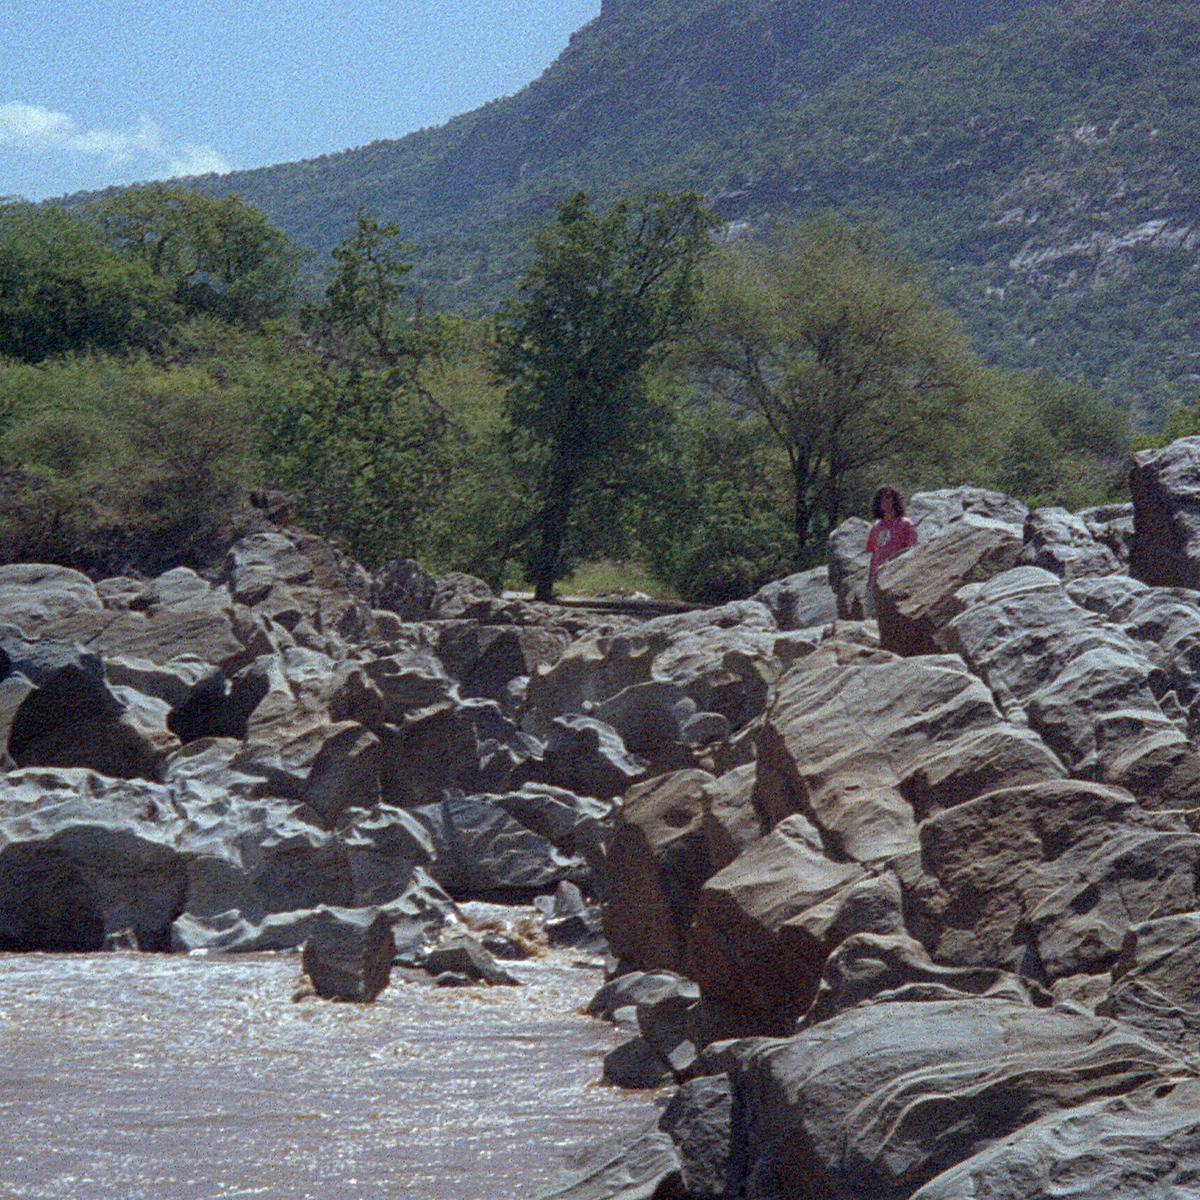 Paul on the Turkwel River